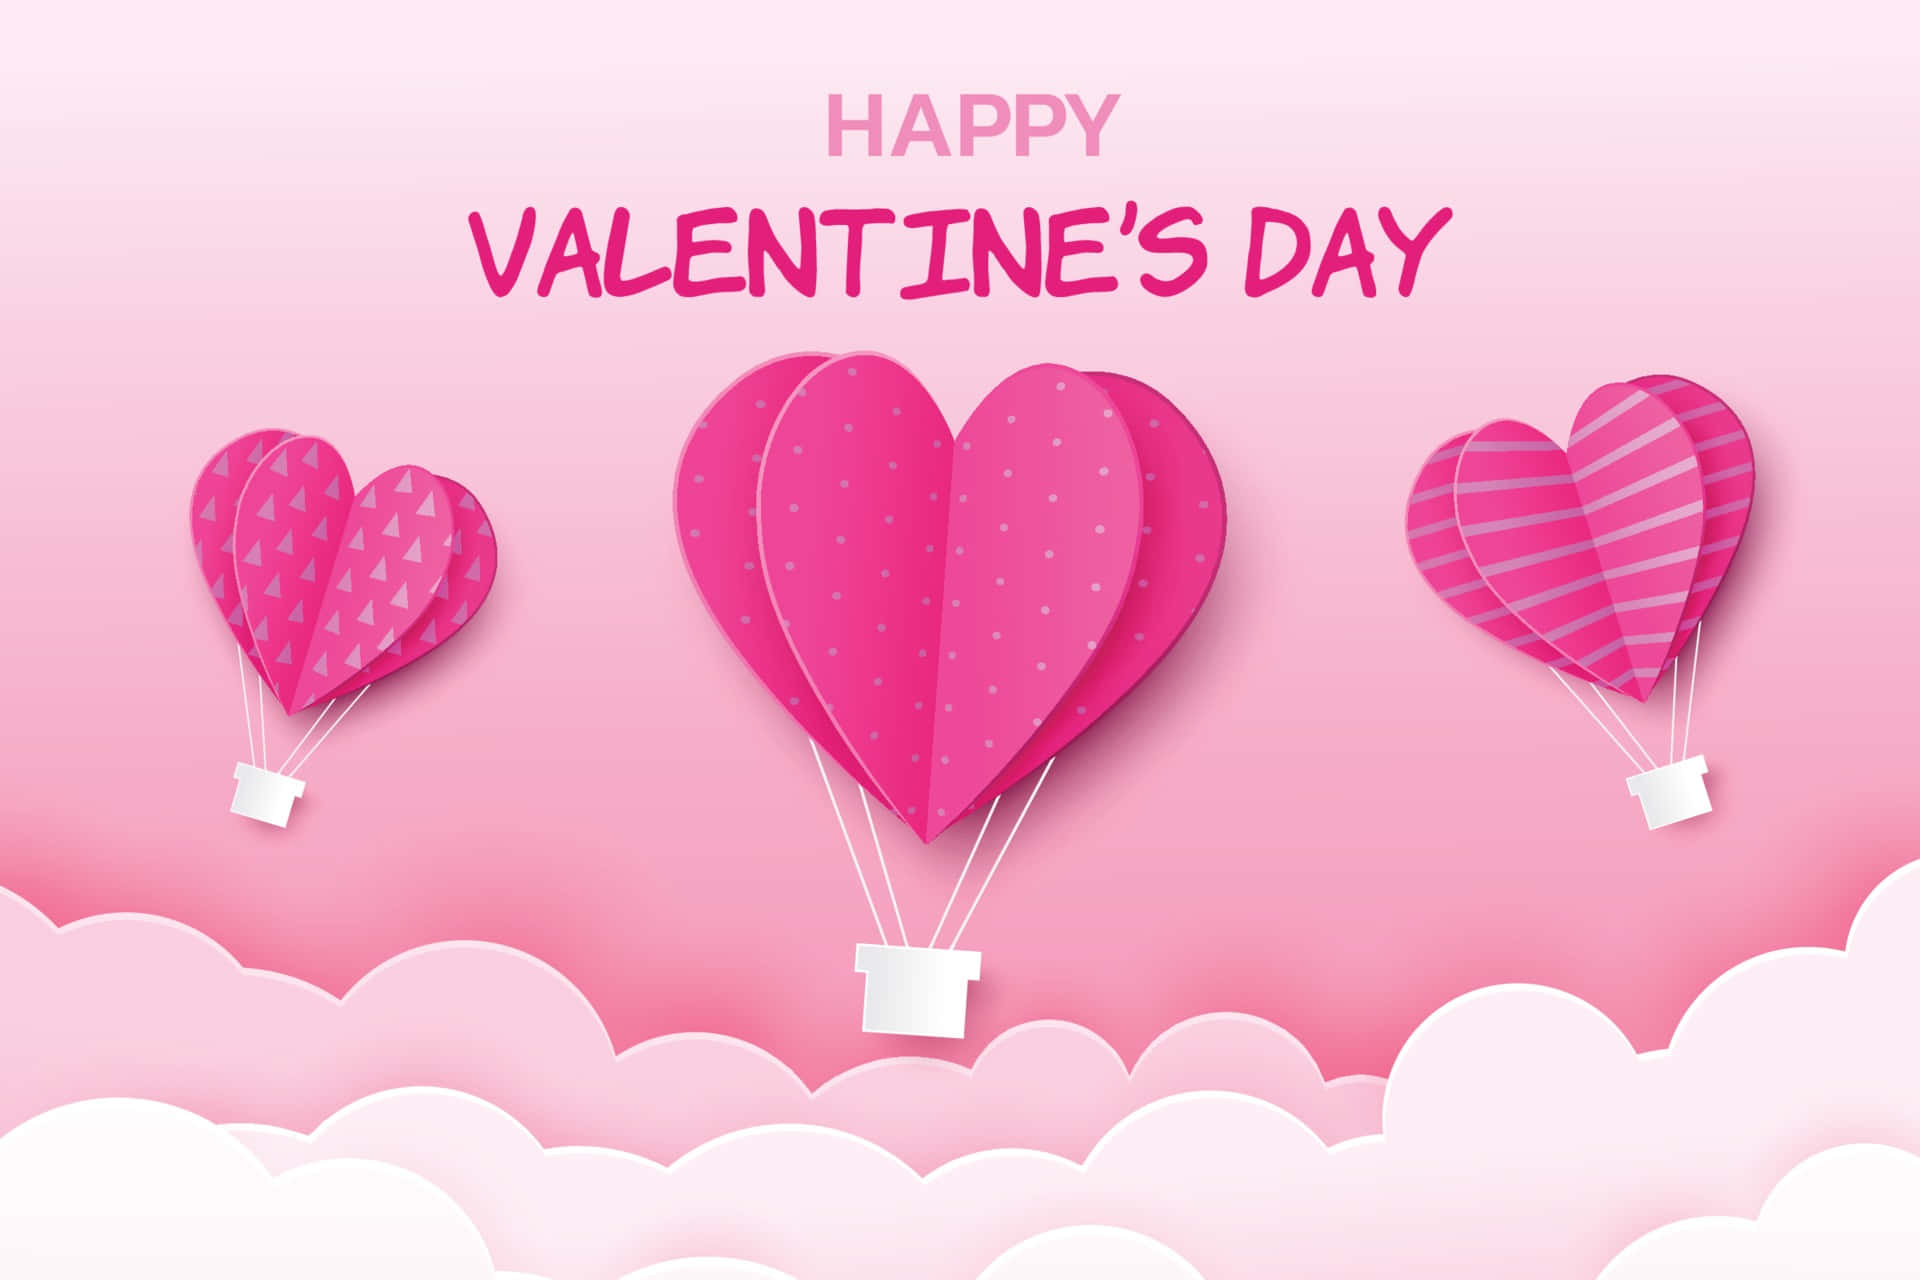 Happy Valentine's Day With Pink Paper Hearts And Clouds